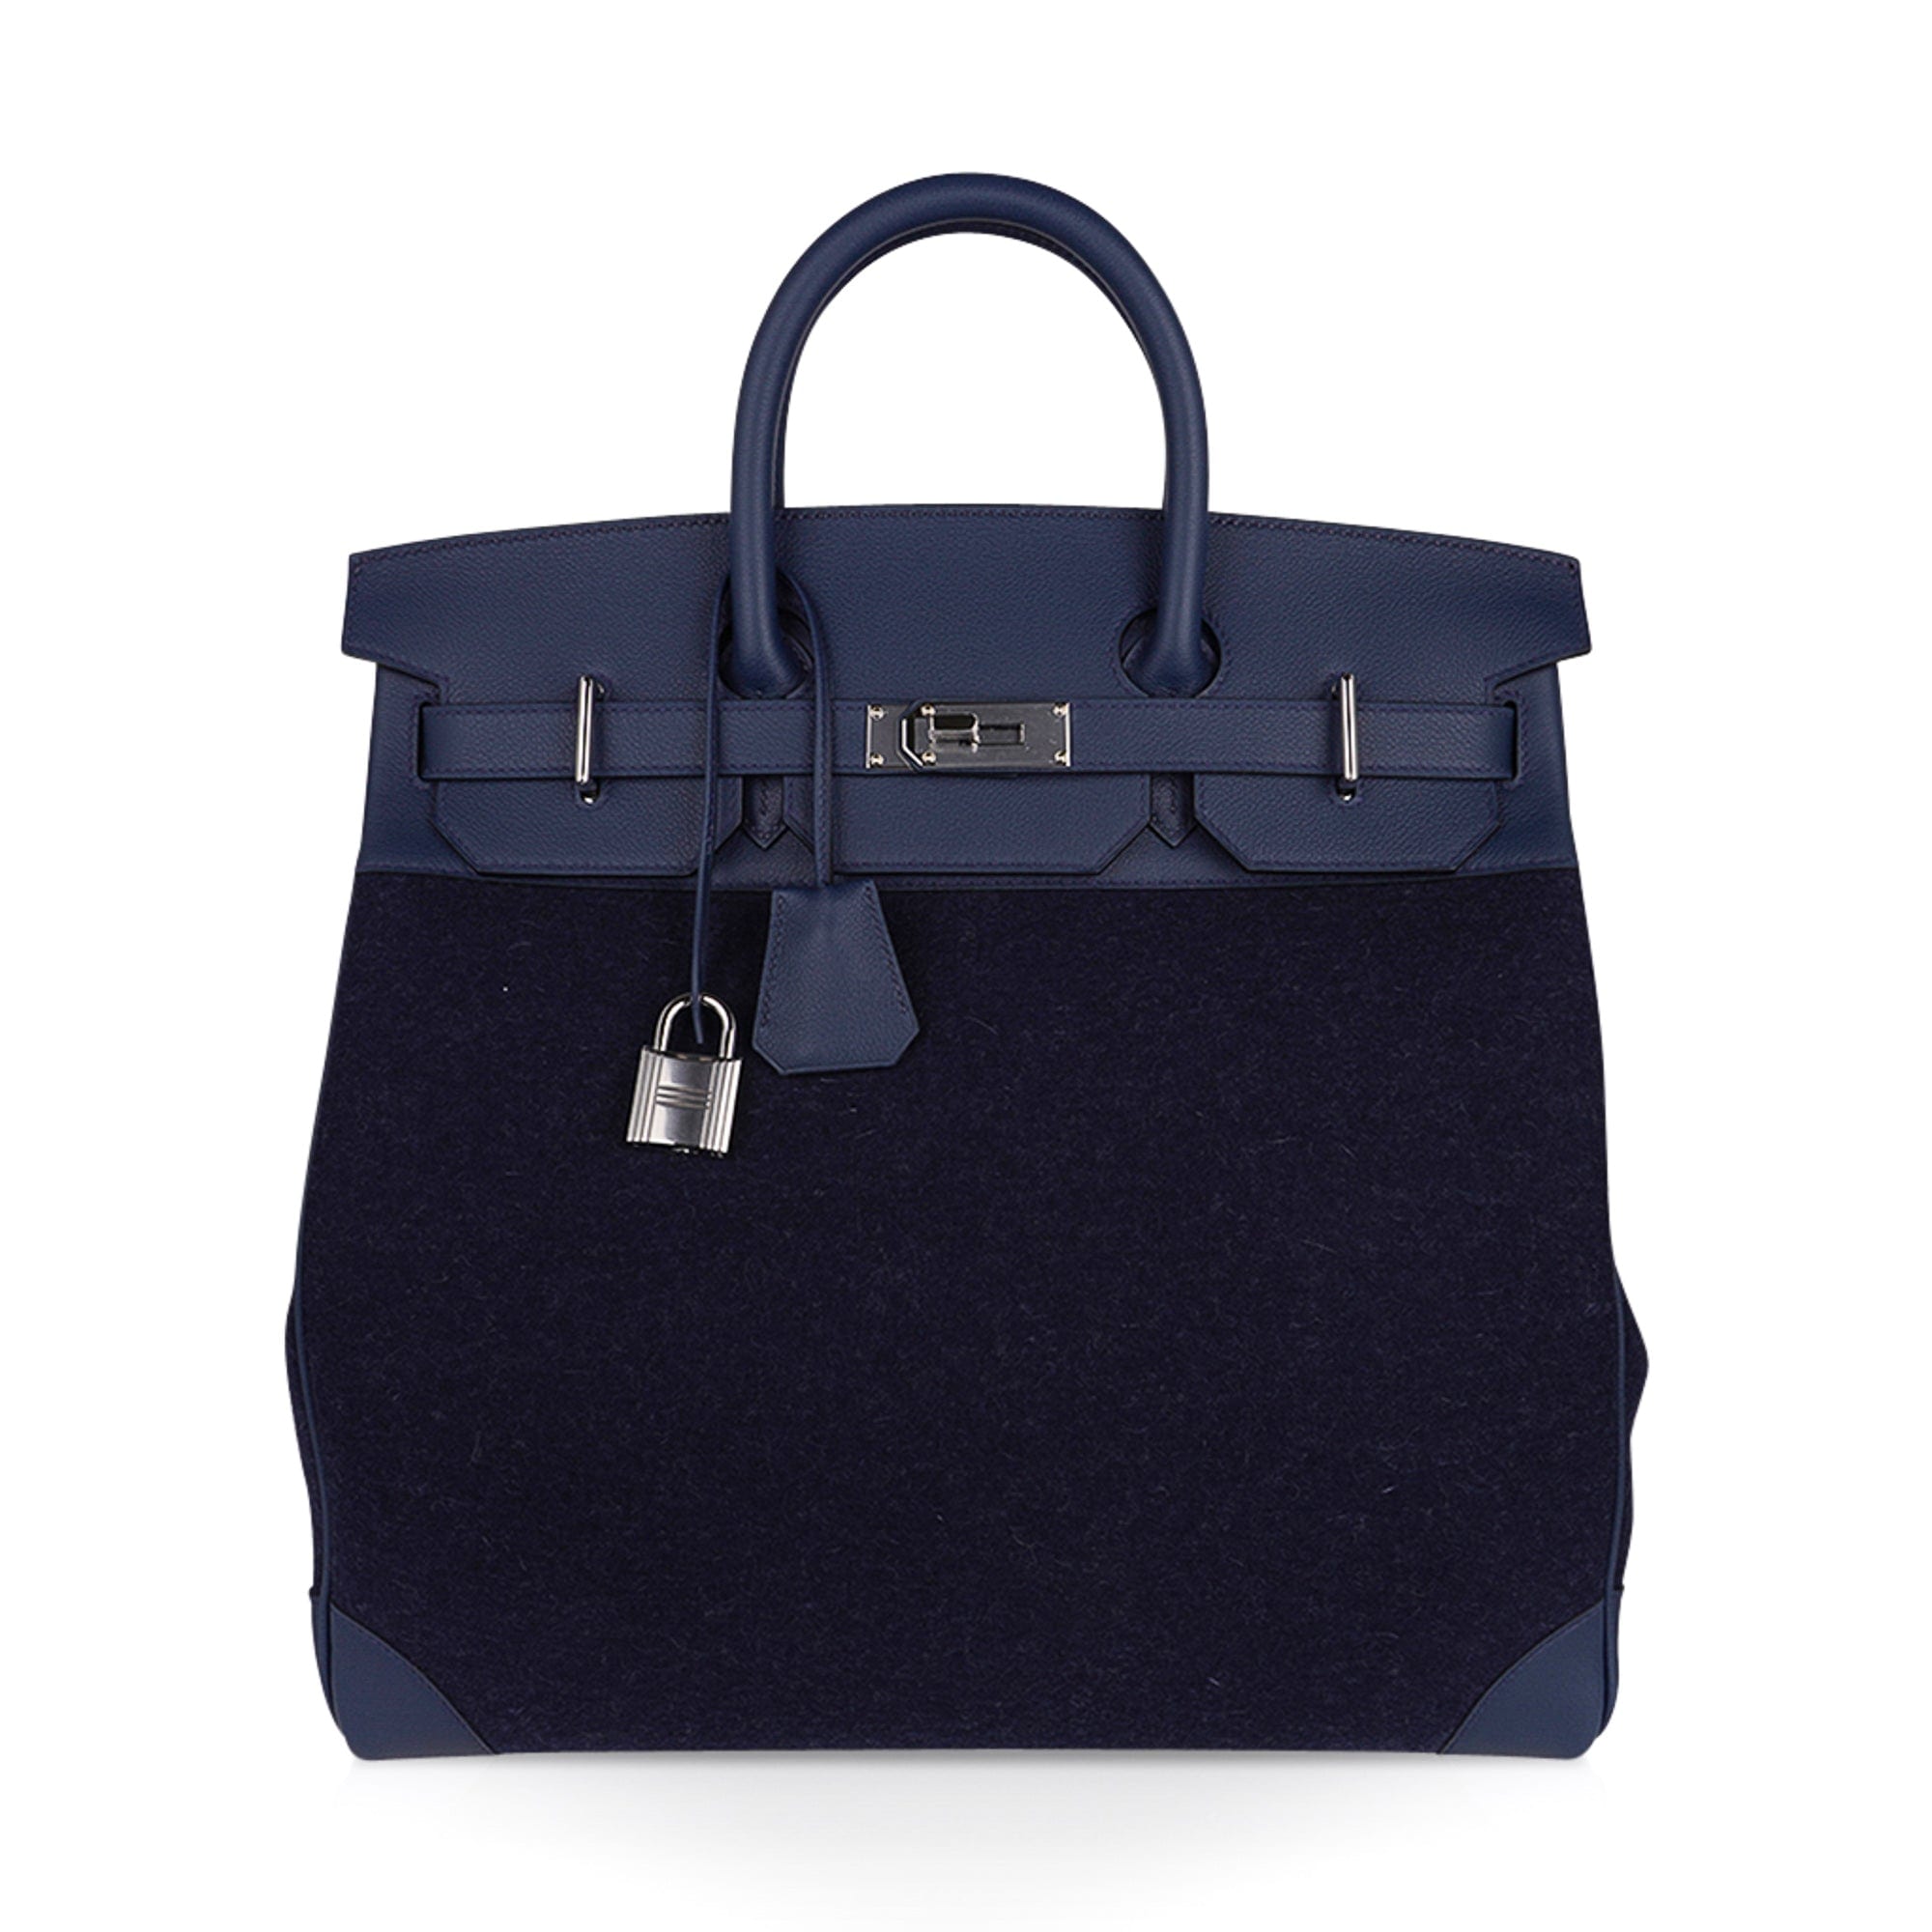 Hermes Birkin 30 in Evercolor Leather Etoupe available now